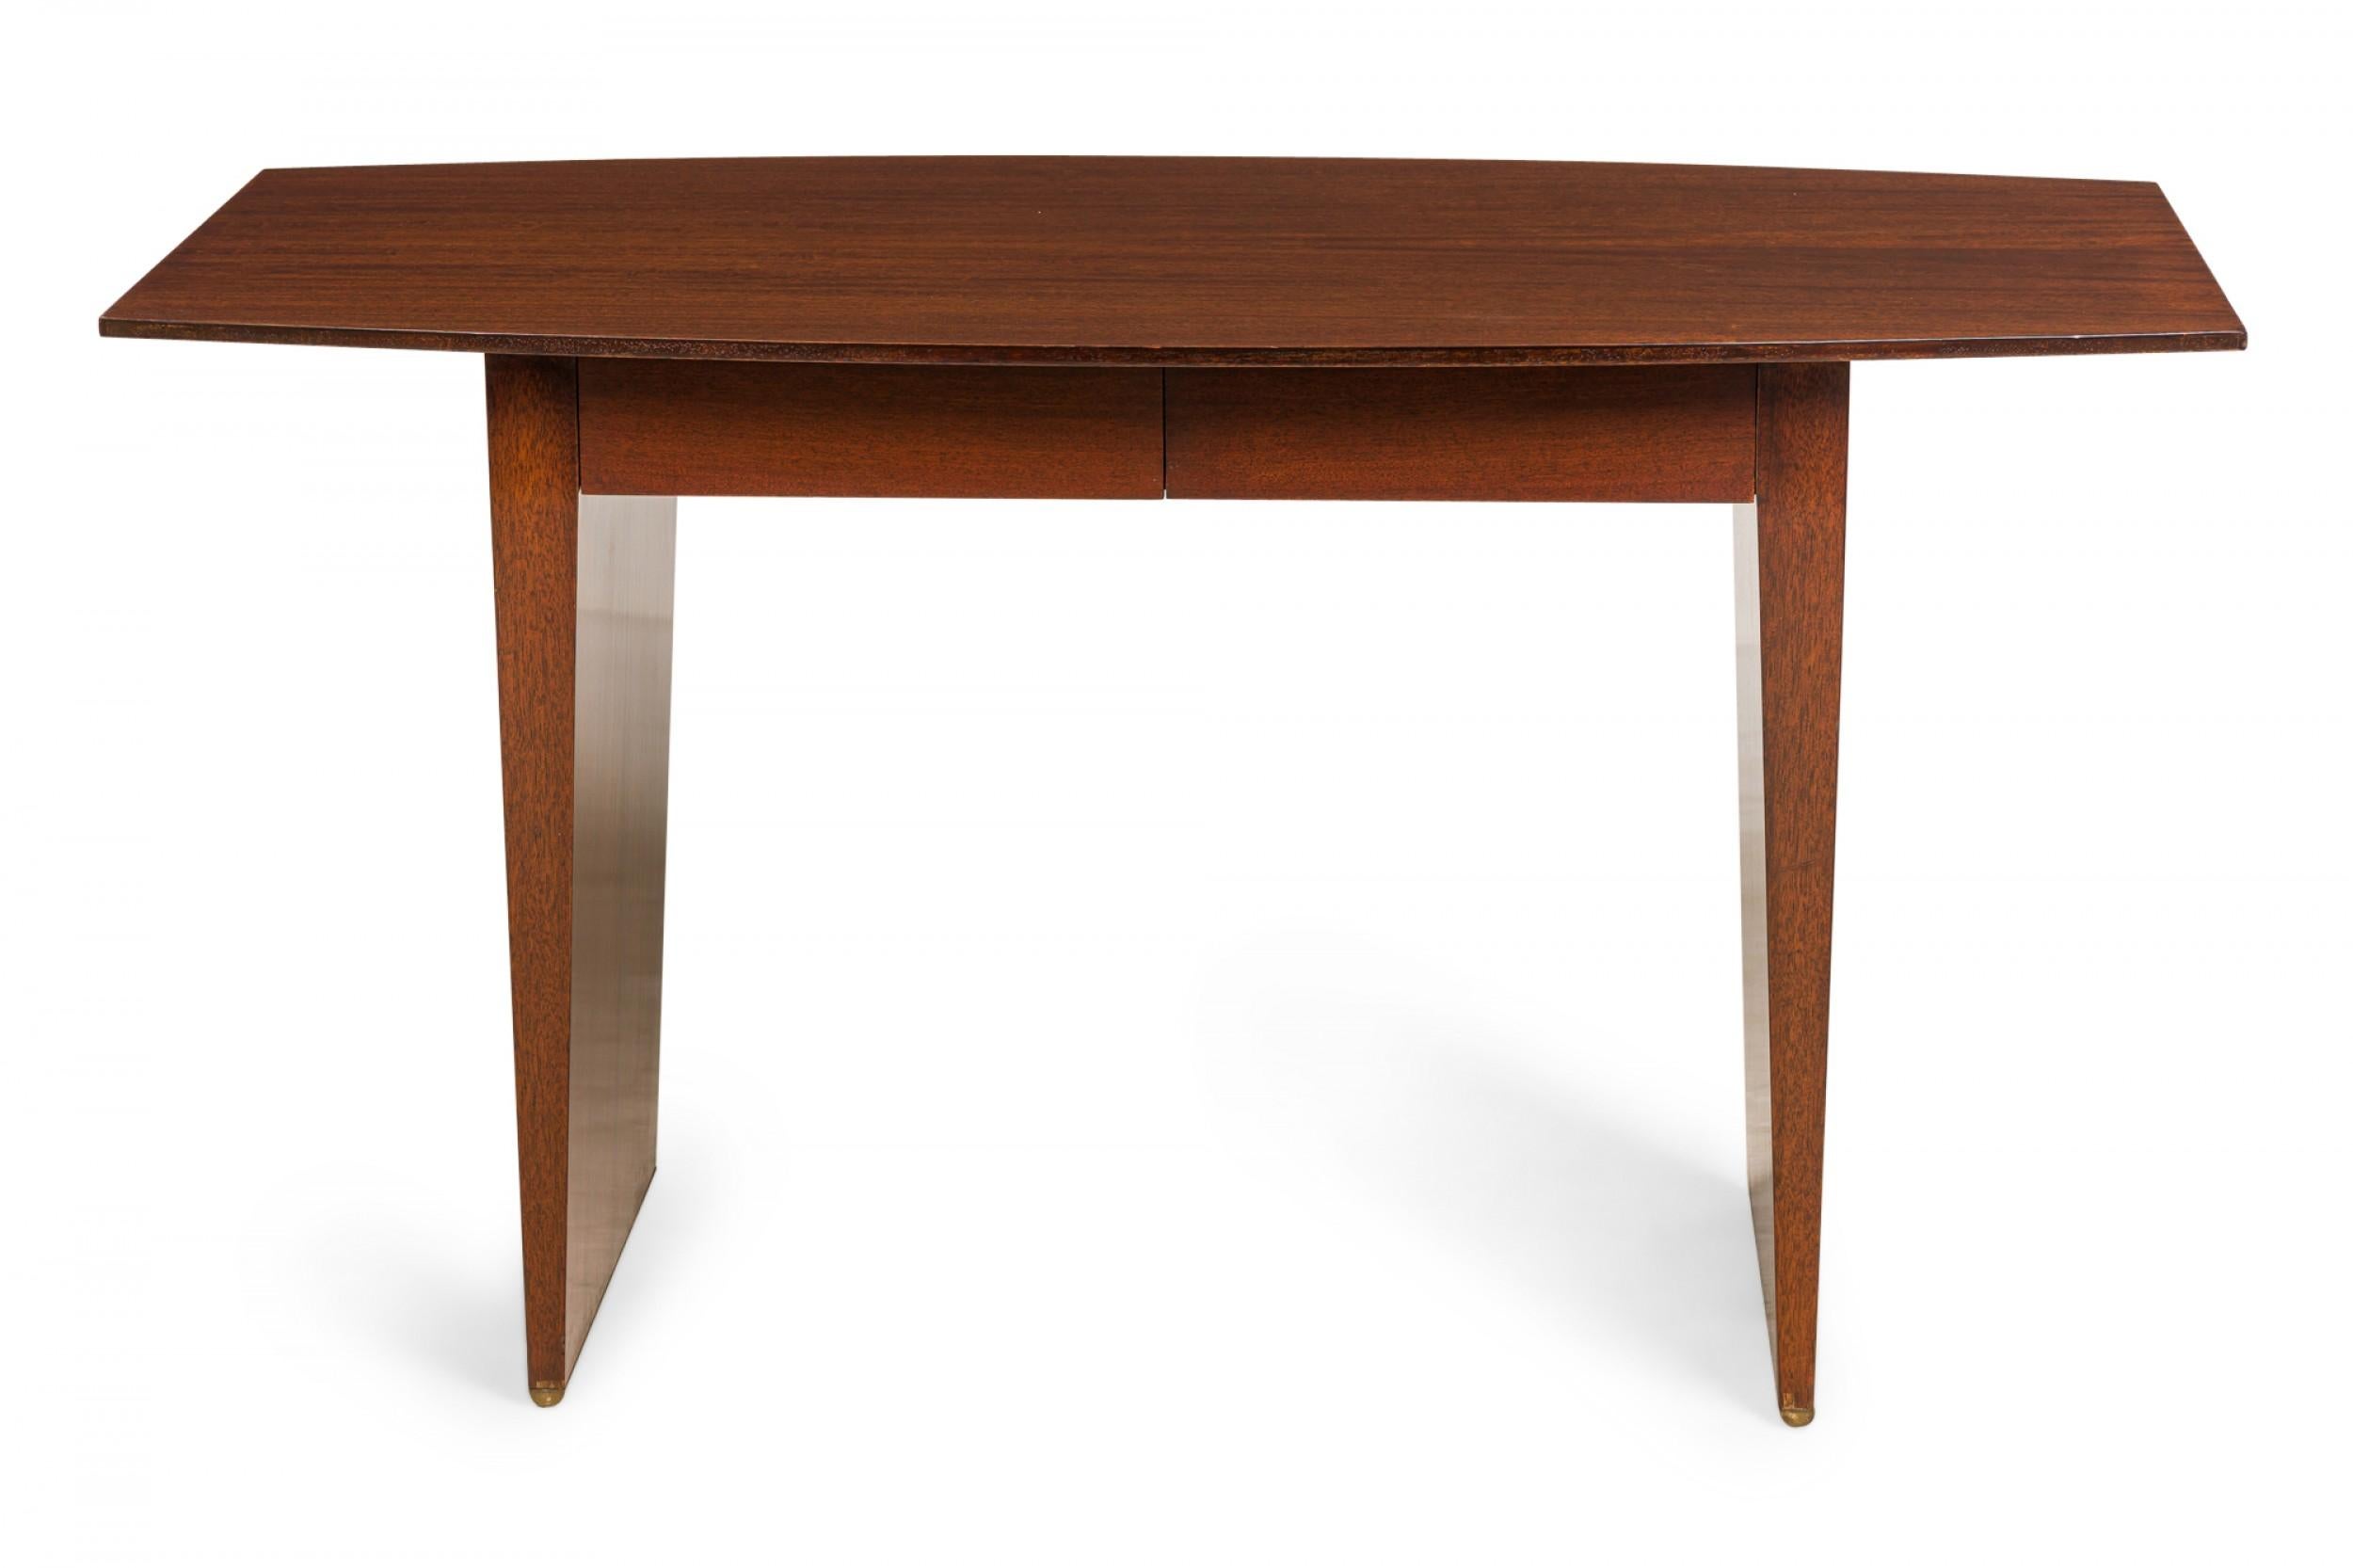 American Mid-Century polished walnut table desk with a 'boat' form top resting on a bracket-shaped walnut base. (HARVEY PROBBER)
